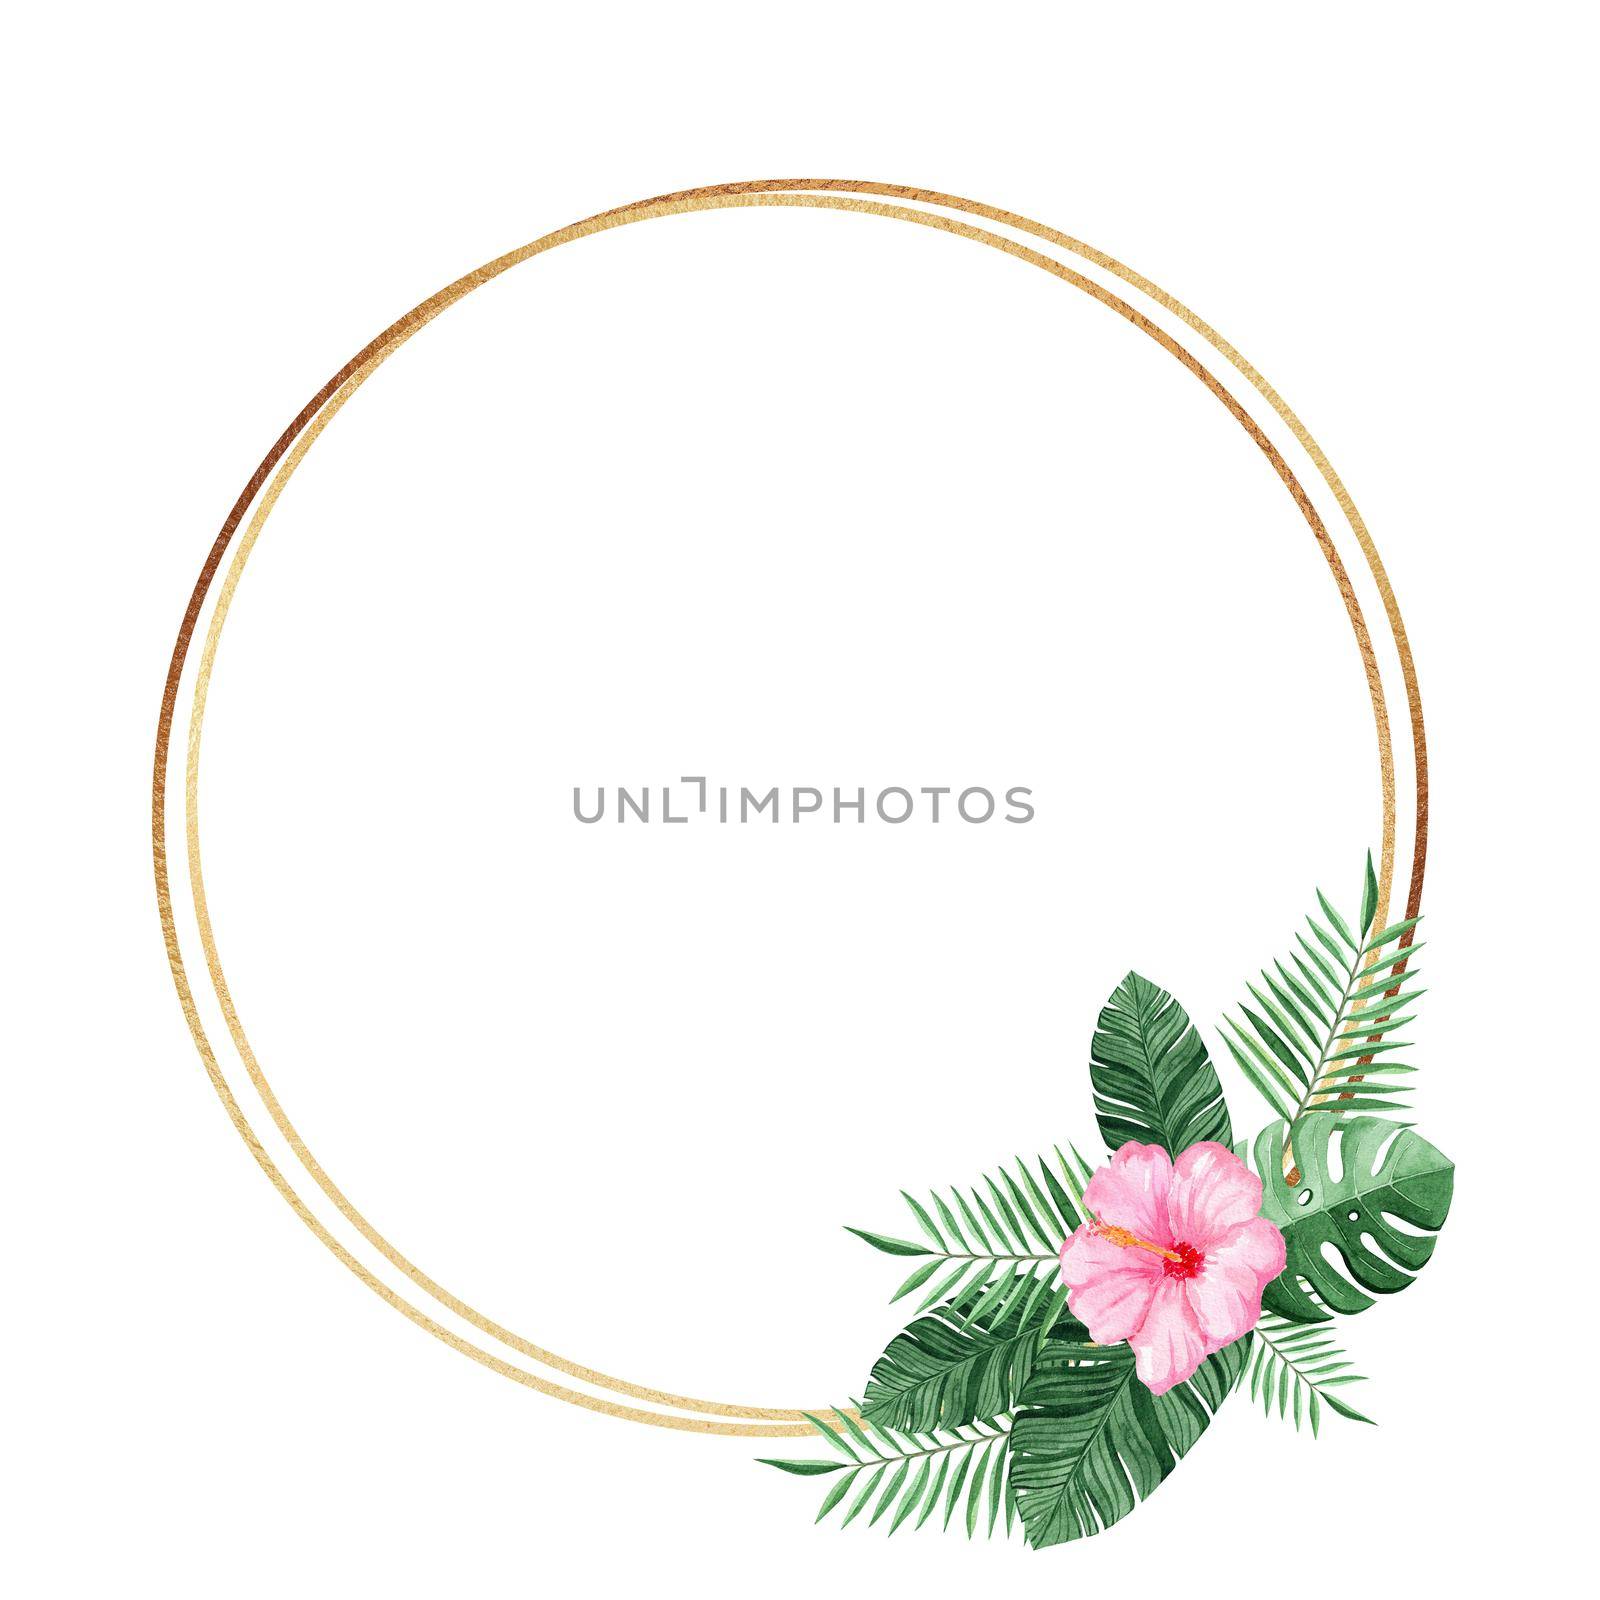 gold round frame with watercolor tropical flowers and leaves isolated on white background. For wedding invitations and cards design by dreamloud